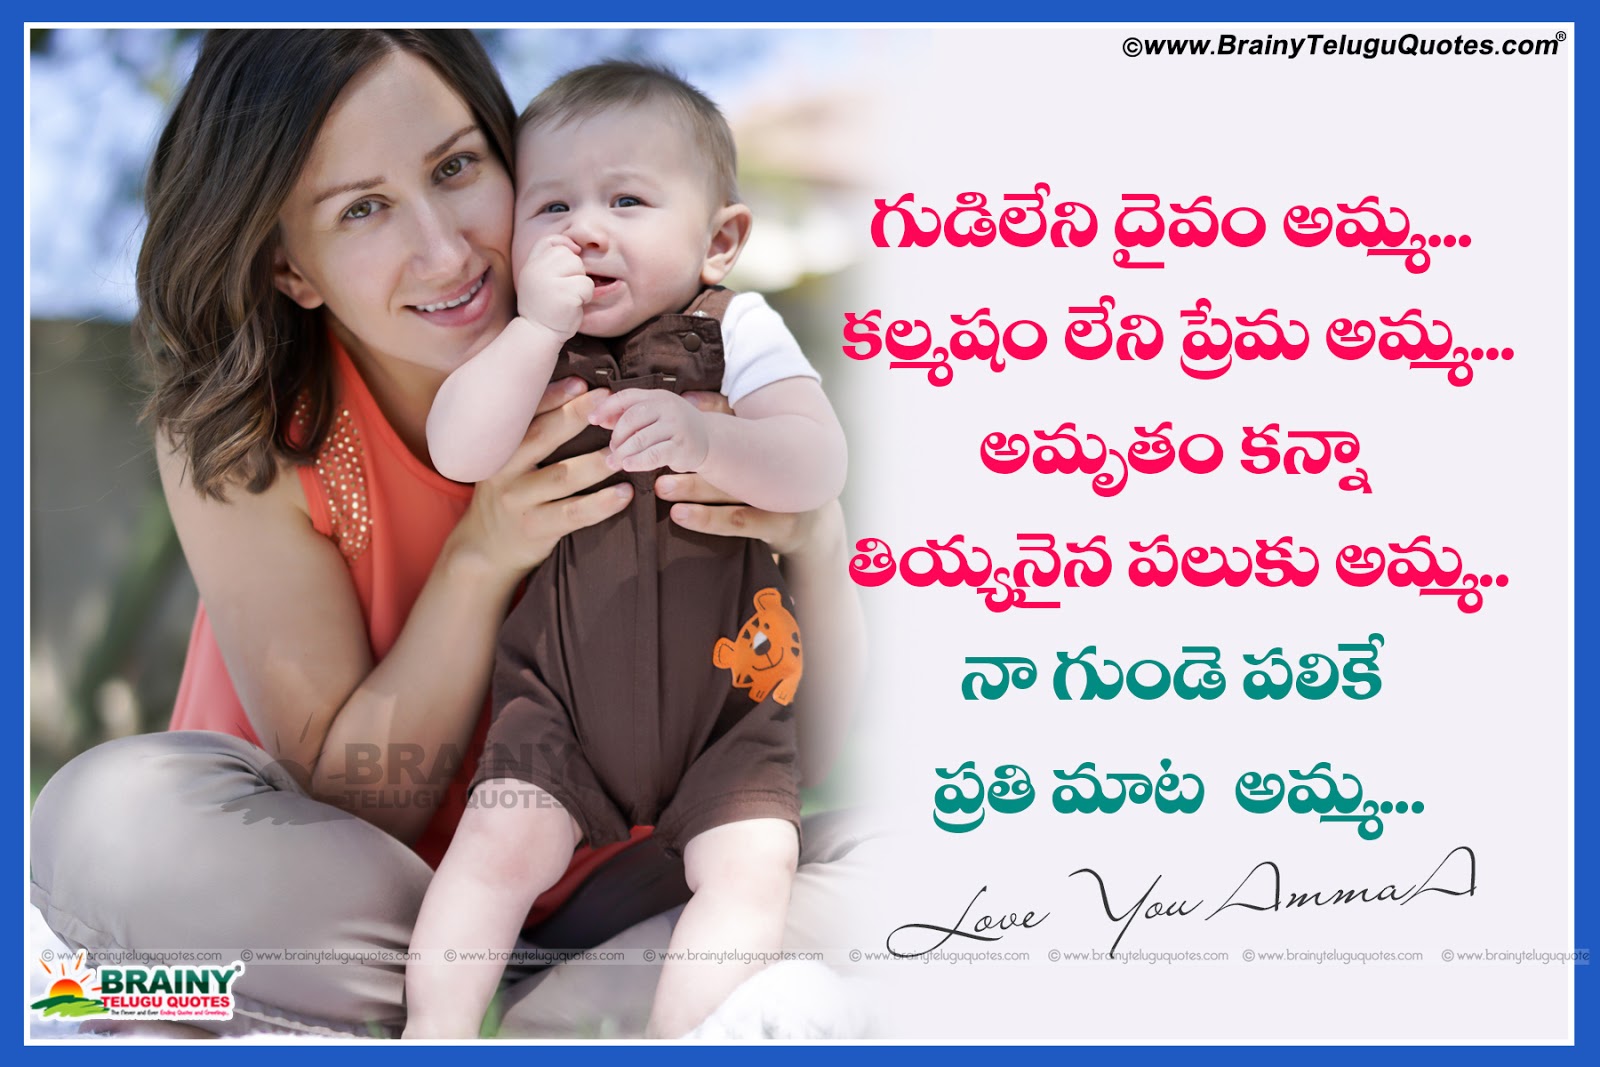 Daughter mothers перевод. Открытка для день матери in Telugu. About mother. Love your mother not girls quotation.